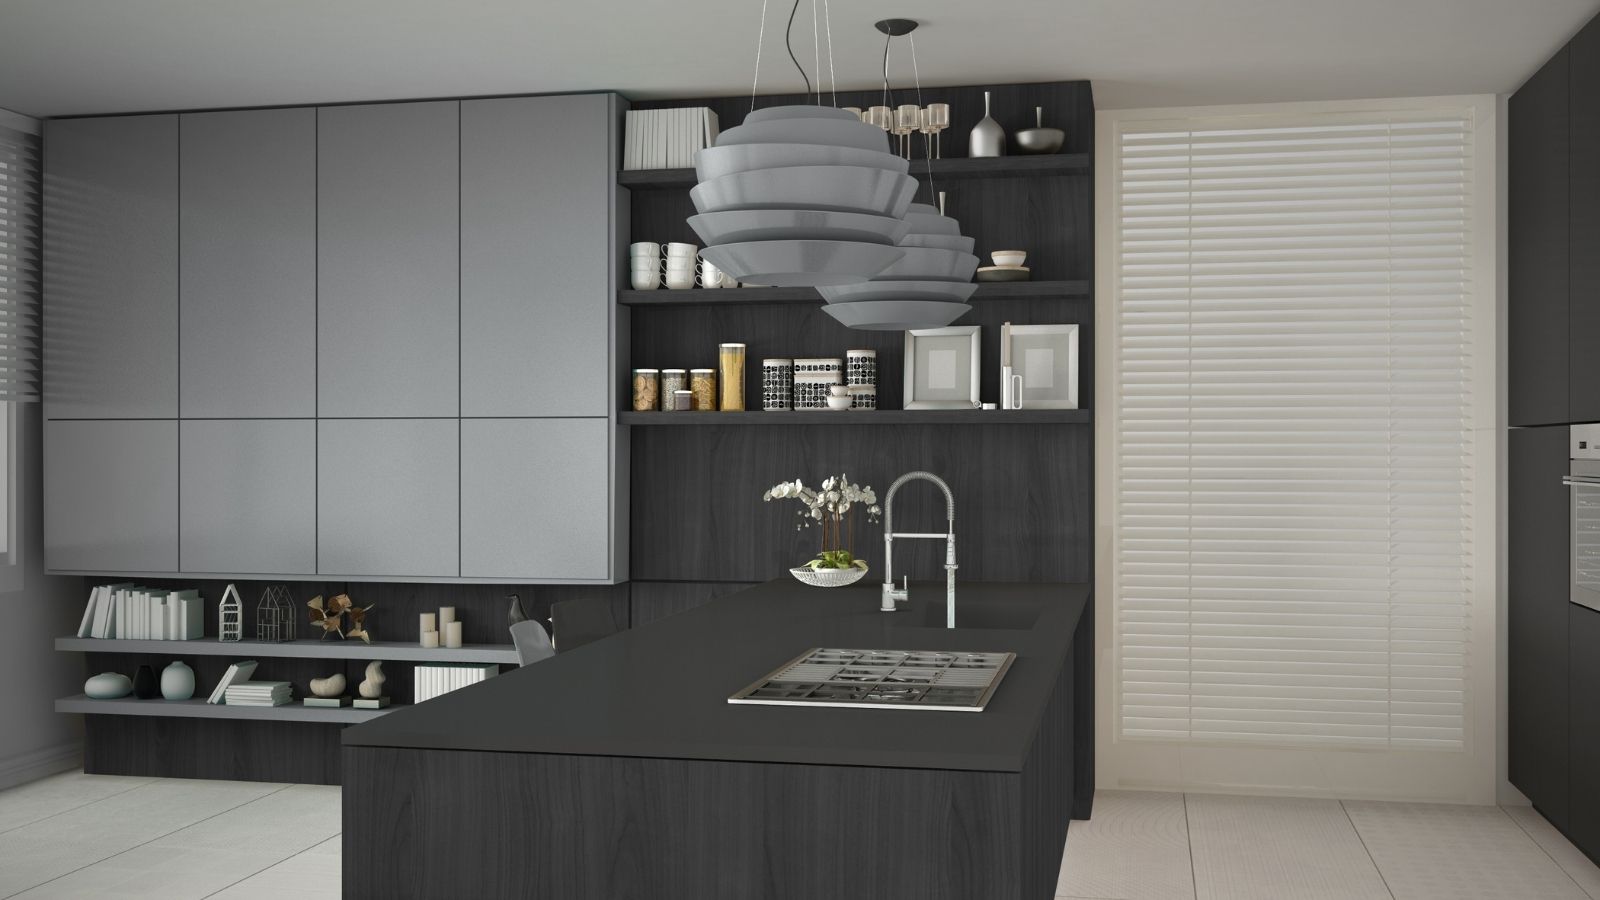 Are gray kitchens still in style?
